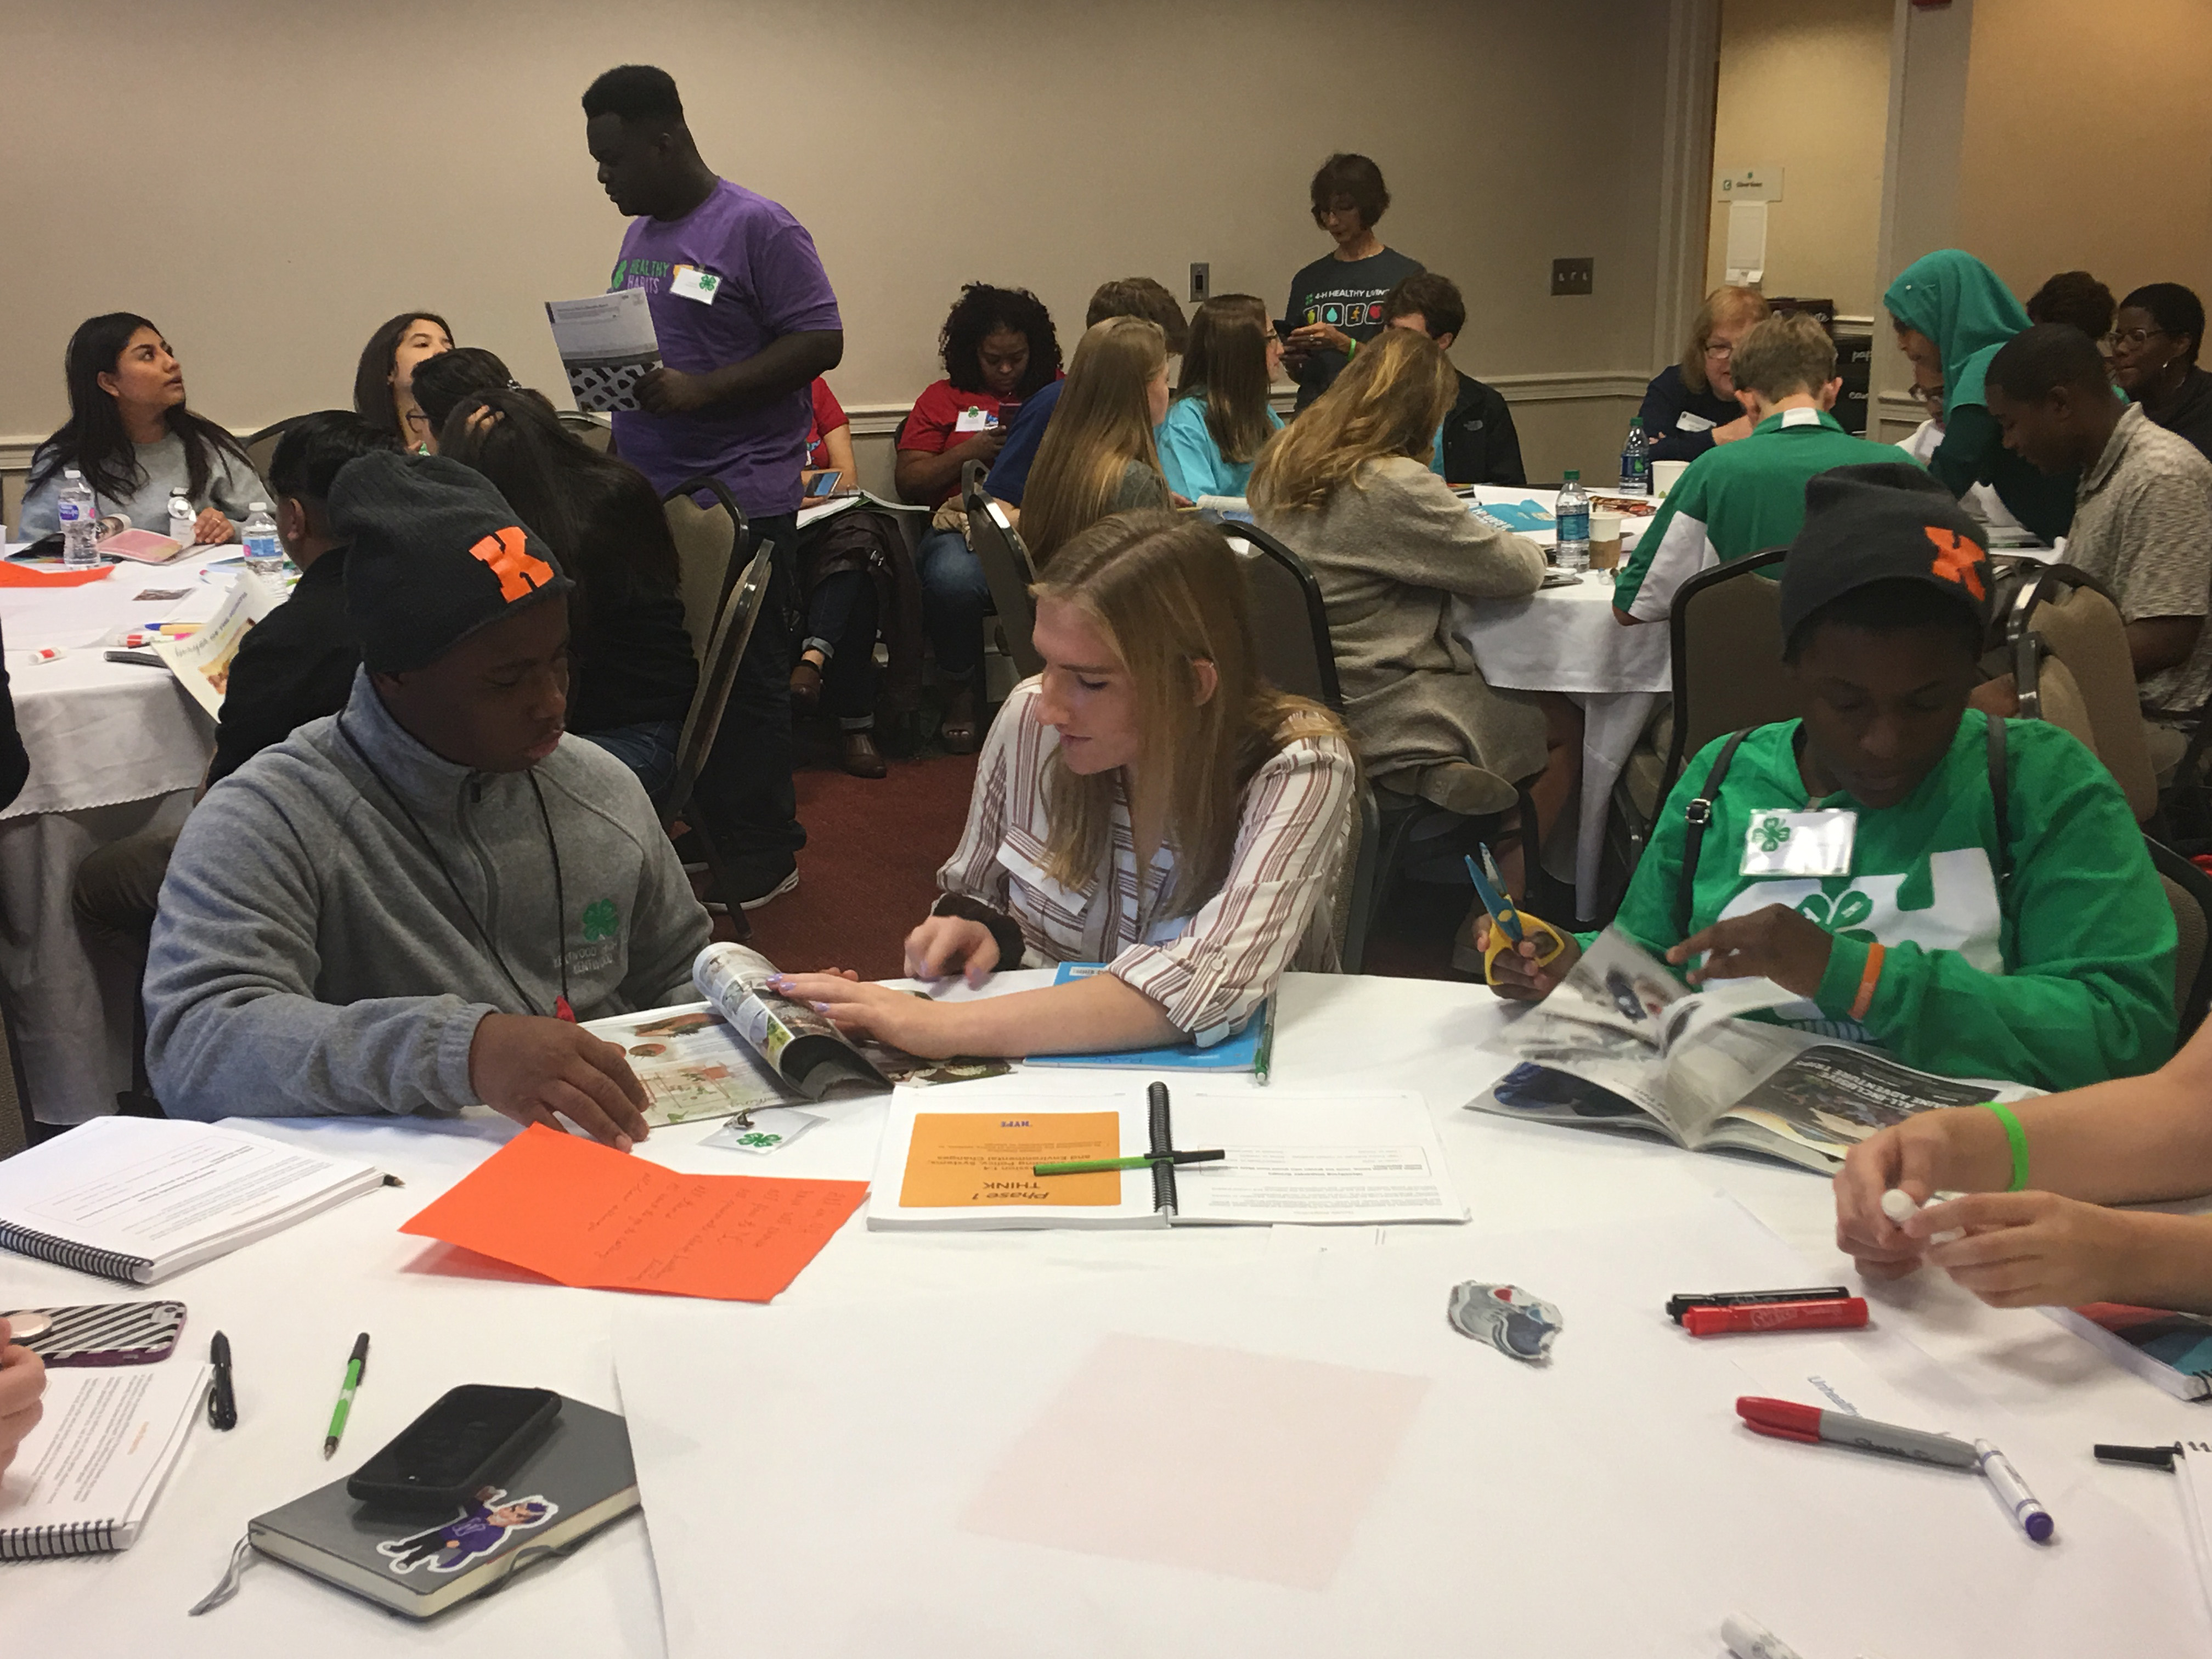 Group of teens learning at the 4-H Healthy Habits training in Washington, D.C.